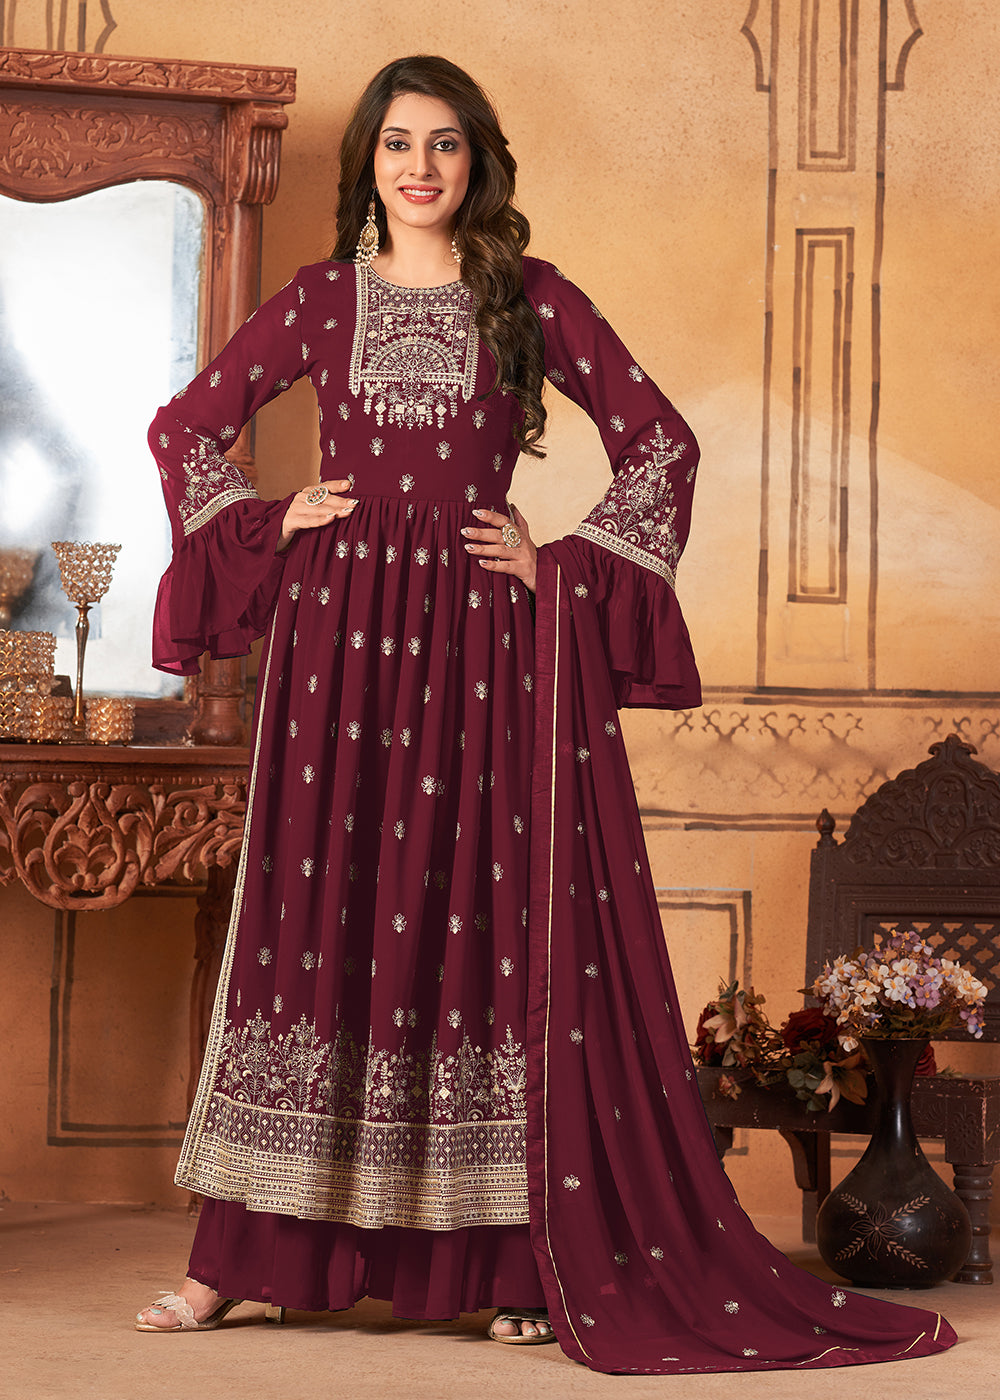 Buy Now Bell Sleeved Radiant Maroon Wedding Function Suit Set Online in USA, UK, Canada & Worldwide at Empress Clothing.